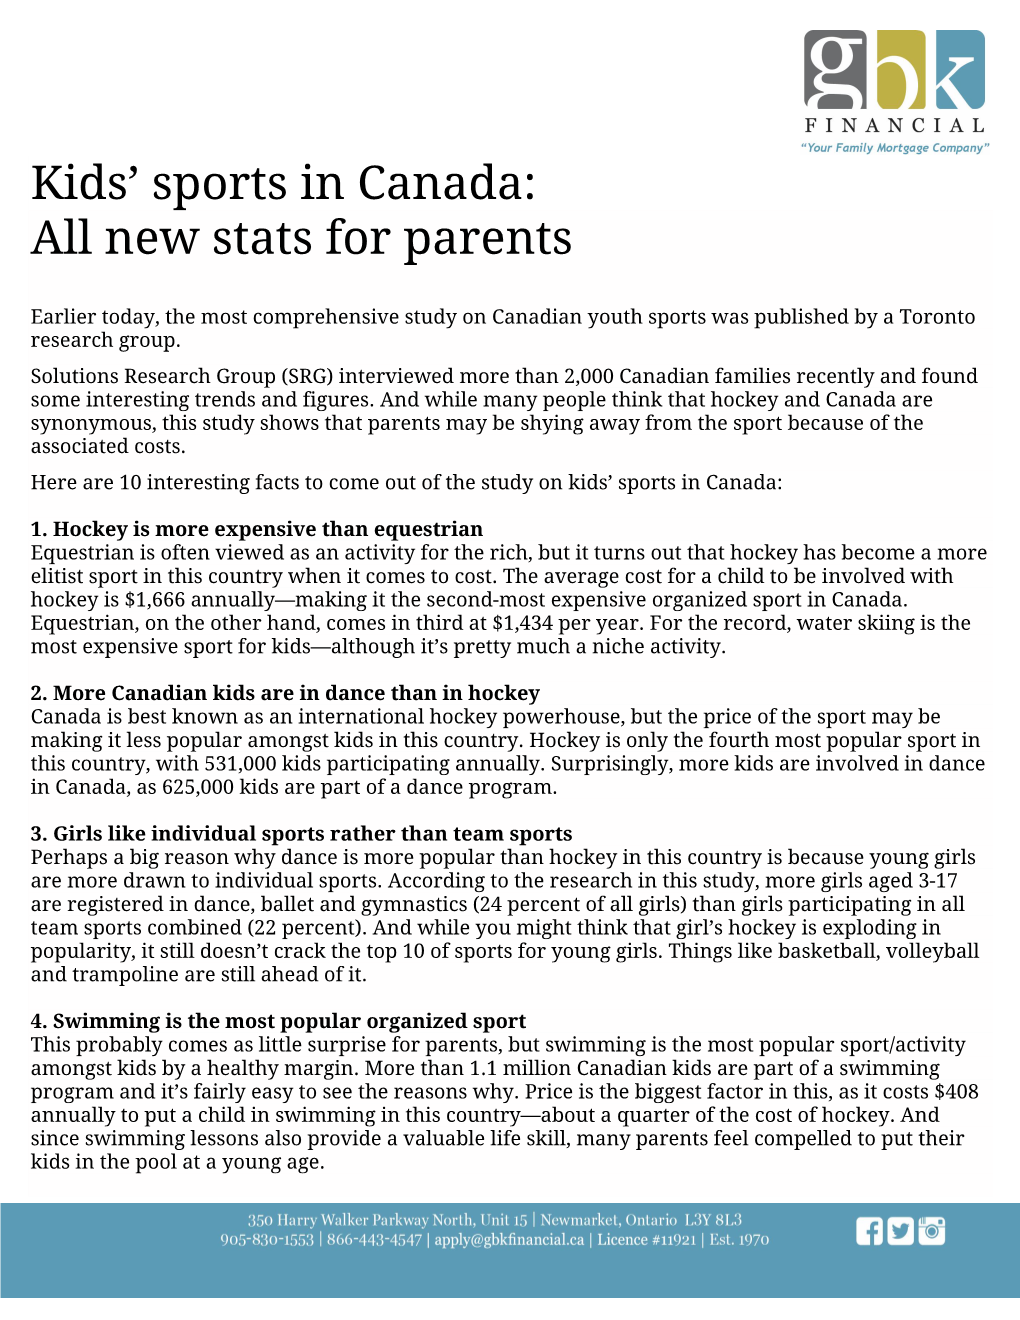 Kids' Sports in Canada: All New Stats for Parents